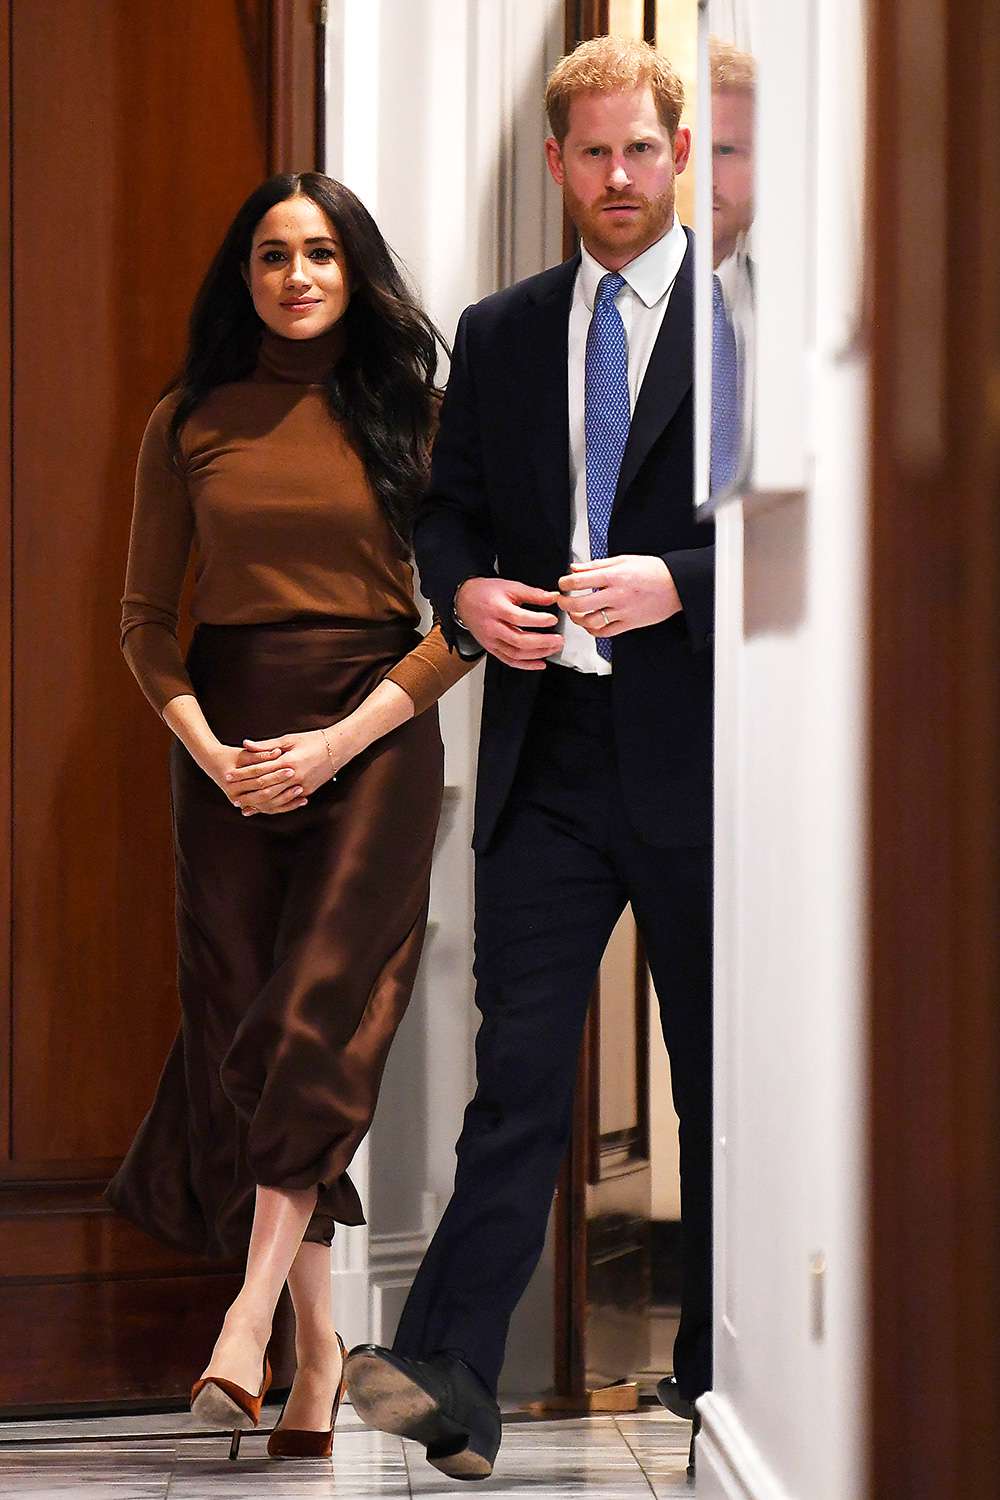 Prince Harry, Duke of Sussex and Meghan, Duchess of Sussex arrive at Canada House on January 07, 2020 in London, England